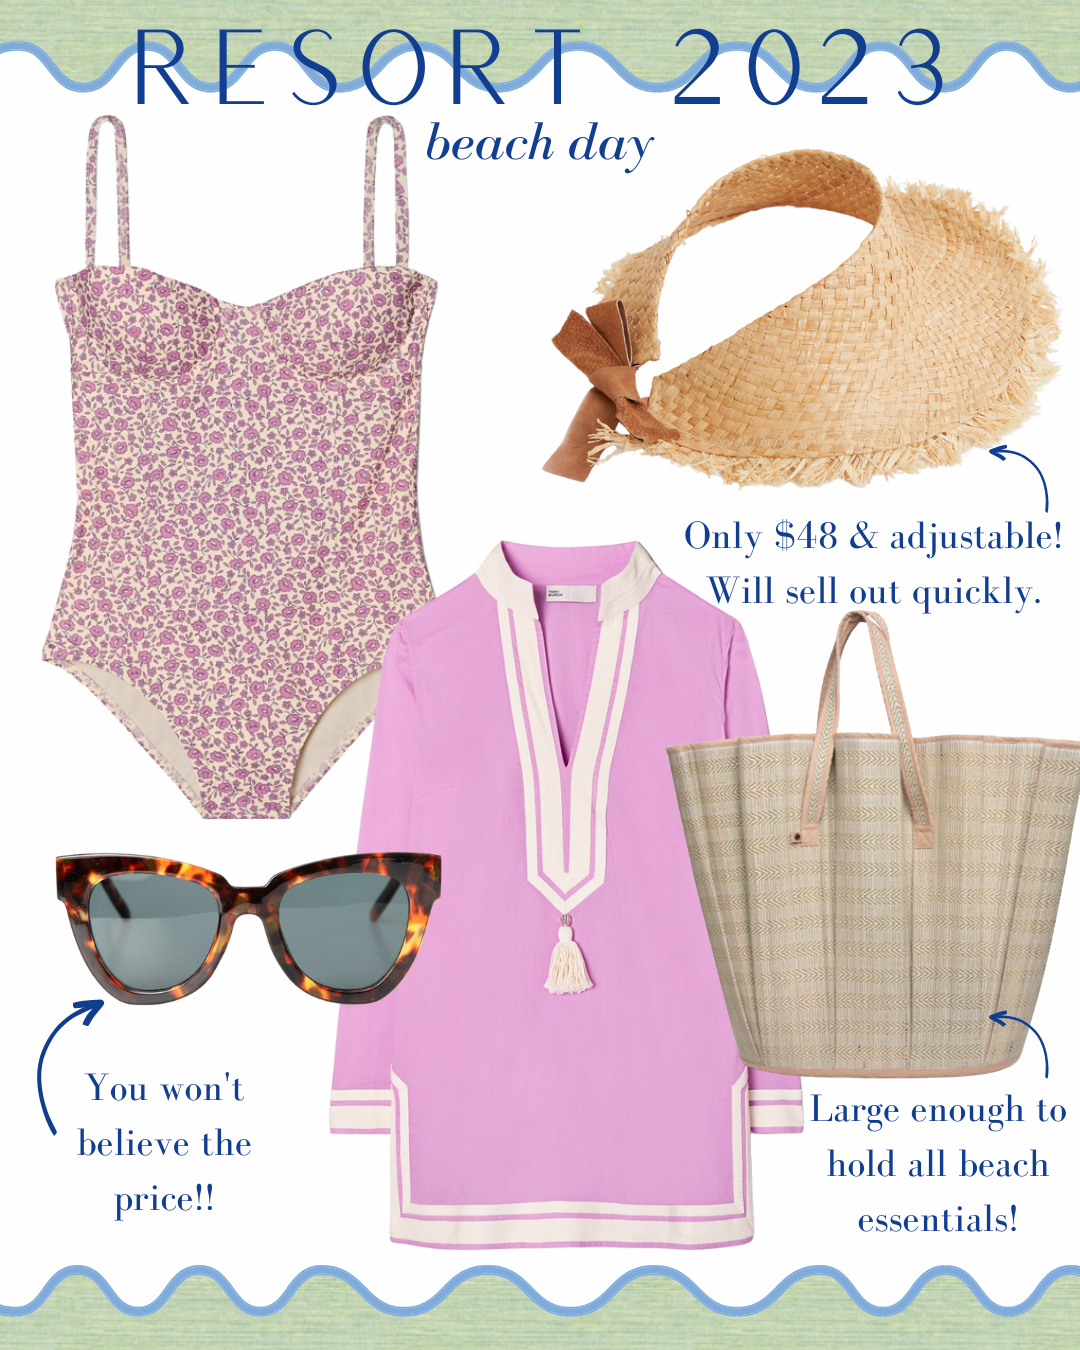 beach day outfit ideas, beach vacation outfit ideas, pink floral one piece swimsuit, raffia woven visor, affordable beach visor, pink tunic cover up, pink swimsuit coverup, woven beach bag, neutral large beach tote, affordable tortoise sunglasses